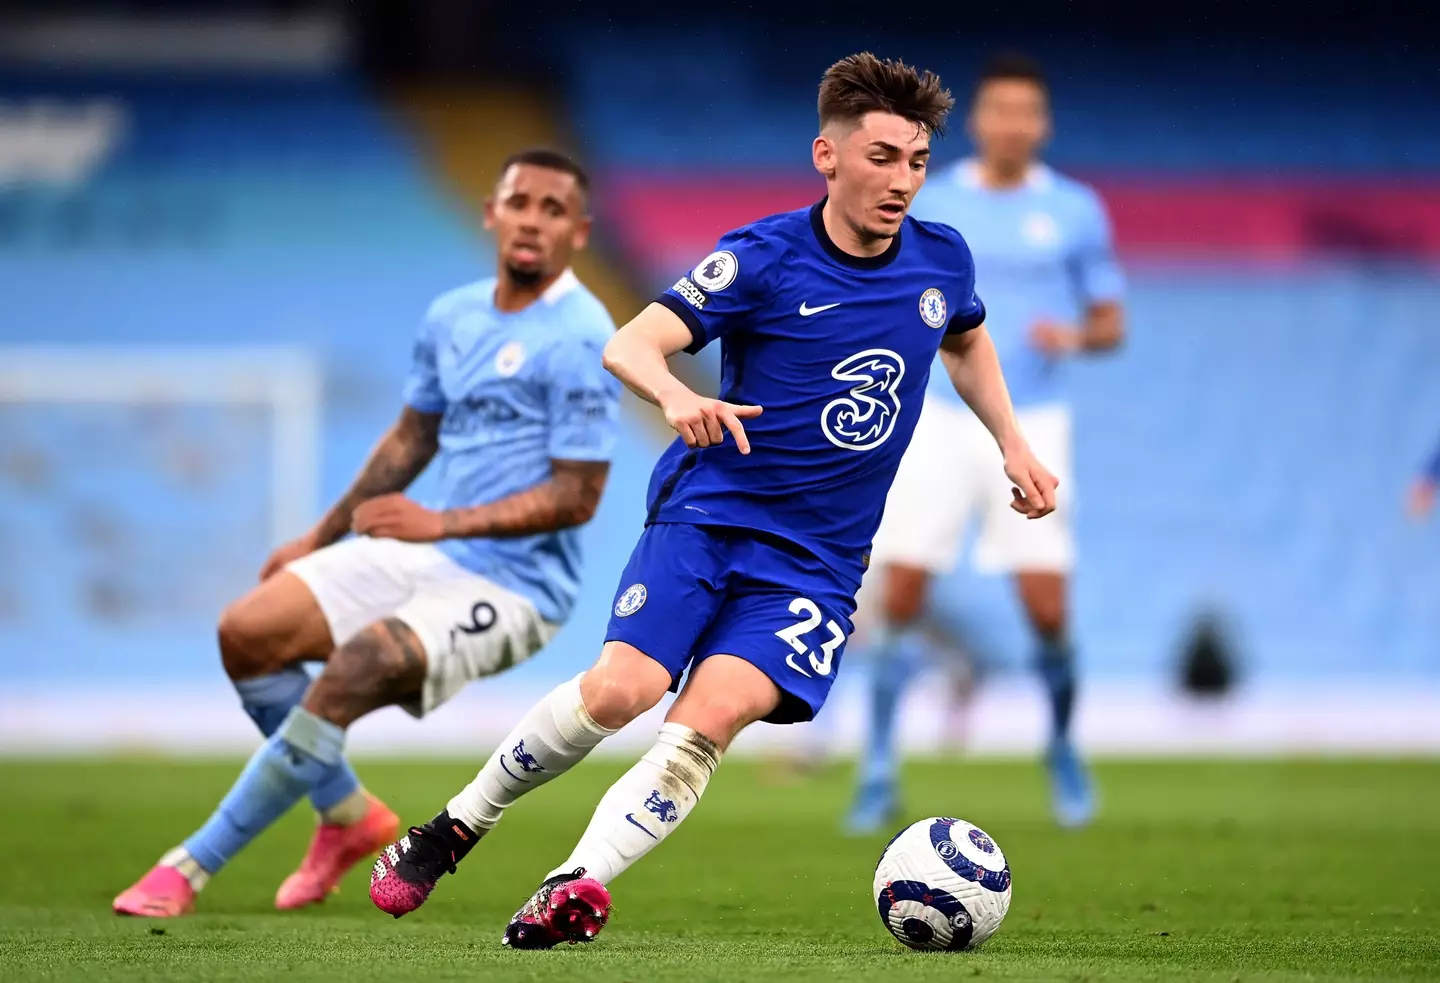 Gilmour in action against Manchester City in May 2021. (Image